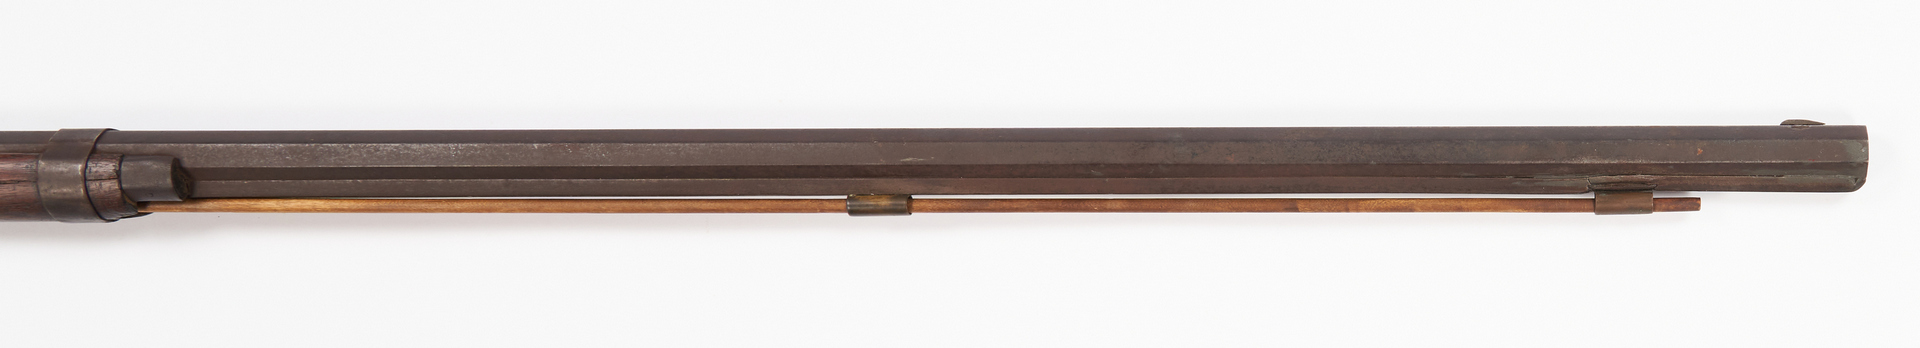 Lot 618: Stacey & Angel, Knox, TN Percussion Long Rifle